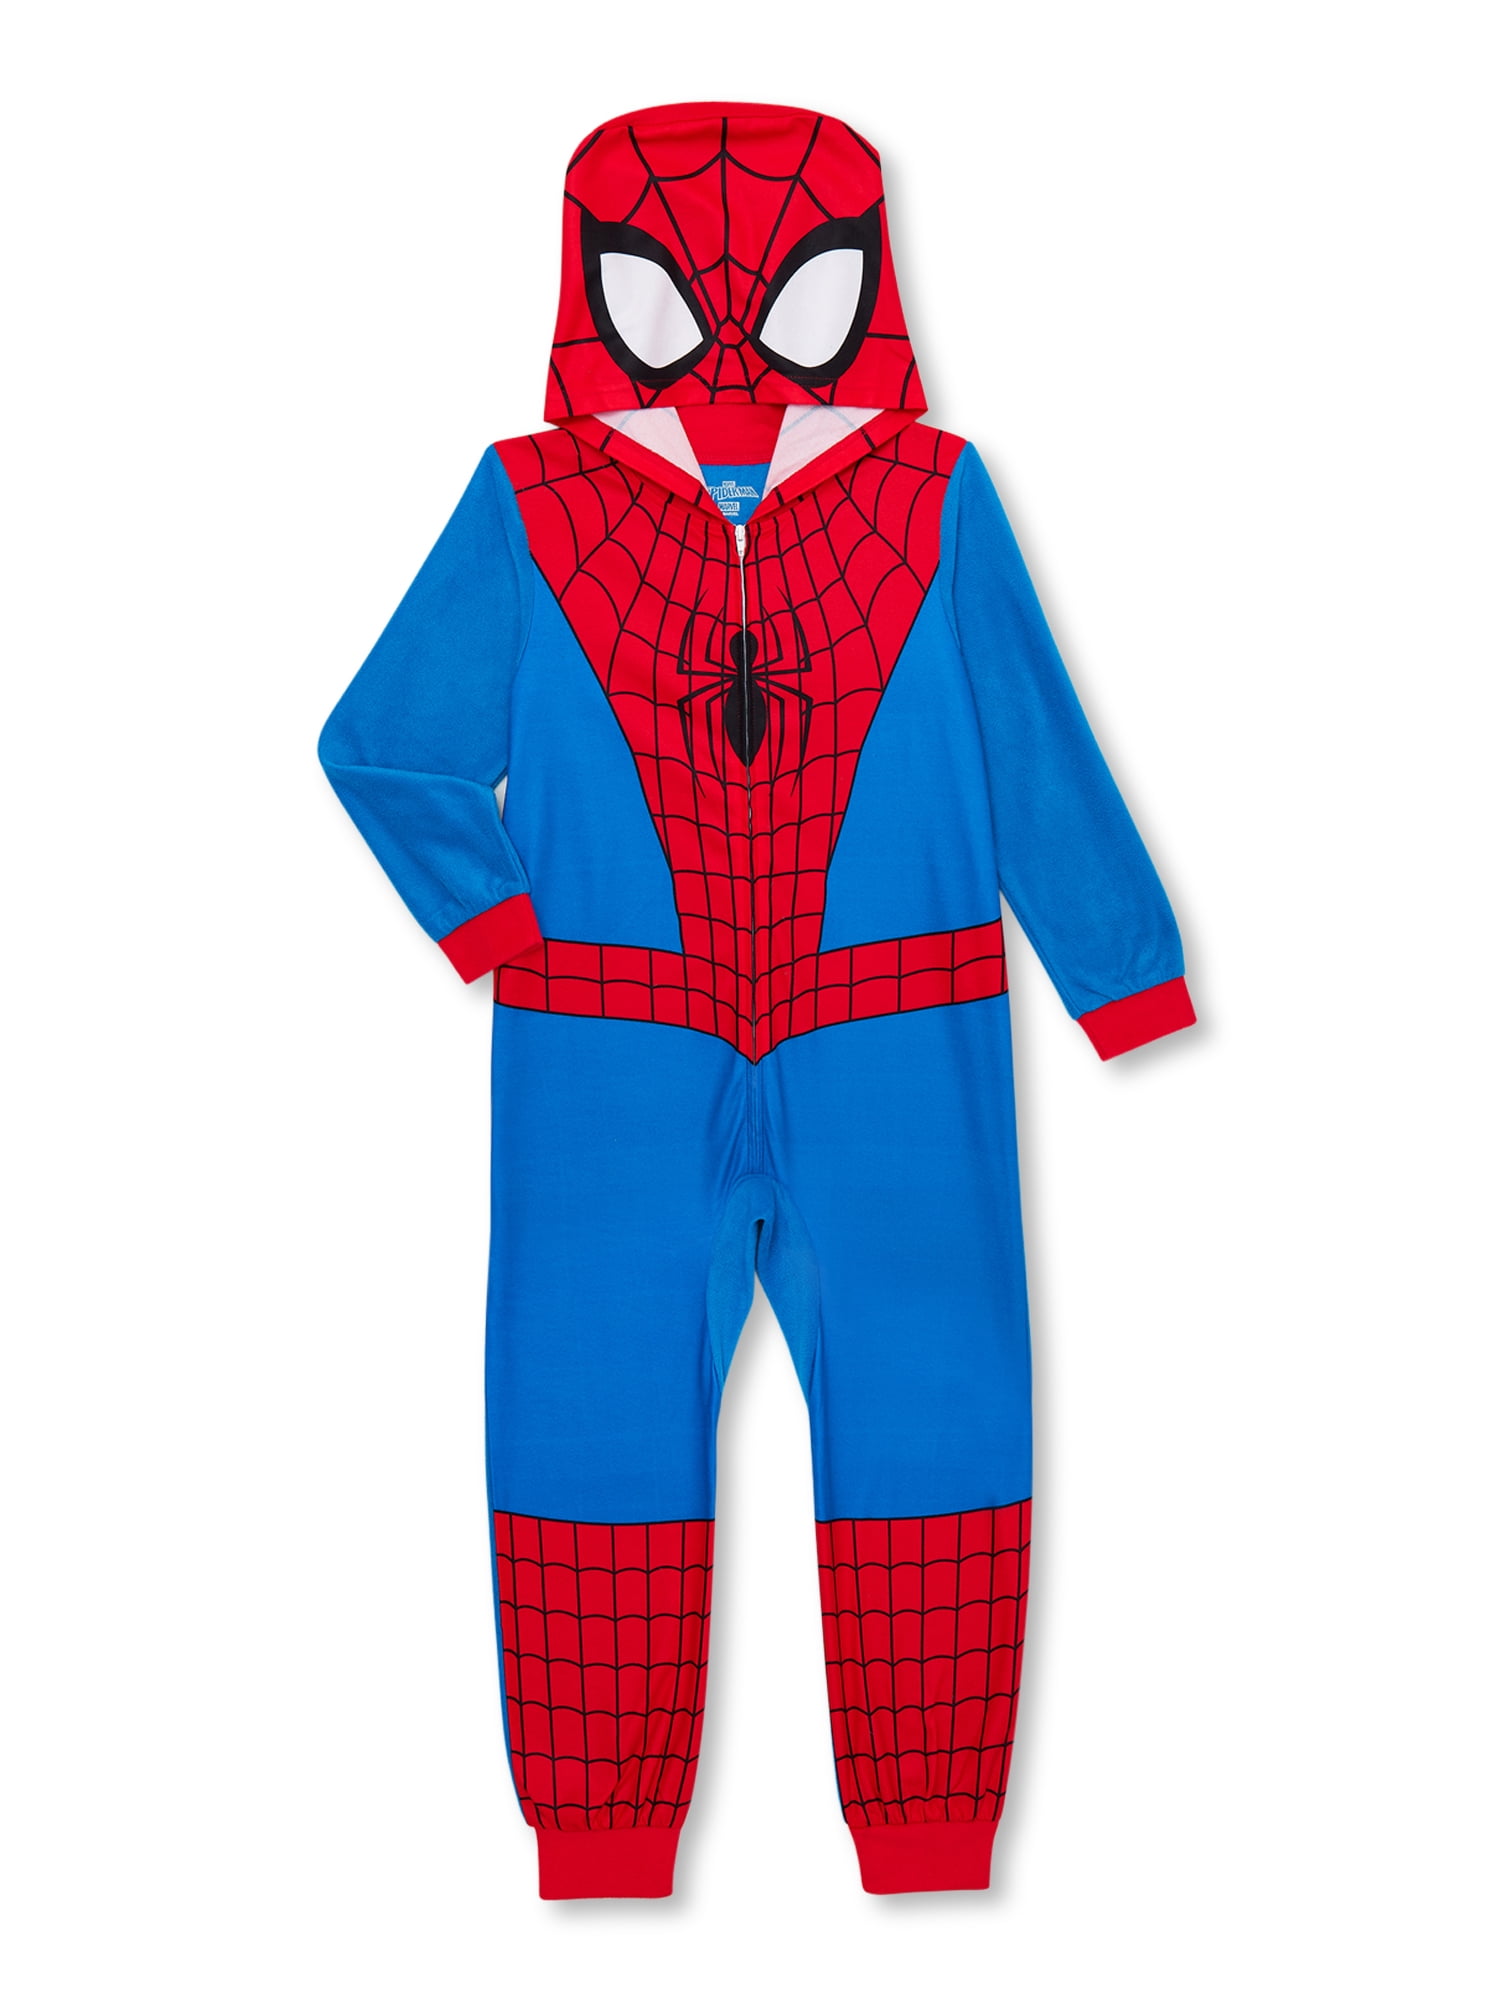 Spider-Man Boys Character Union Suit, Sizes 4-16